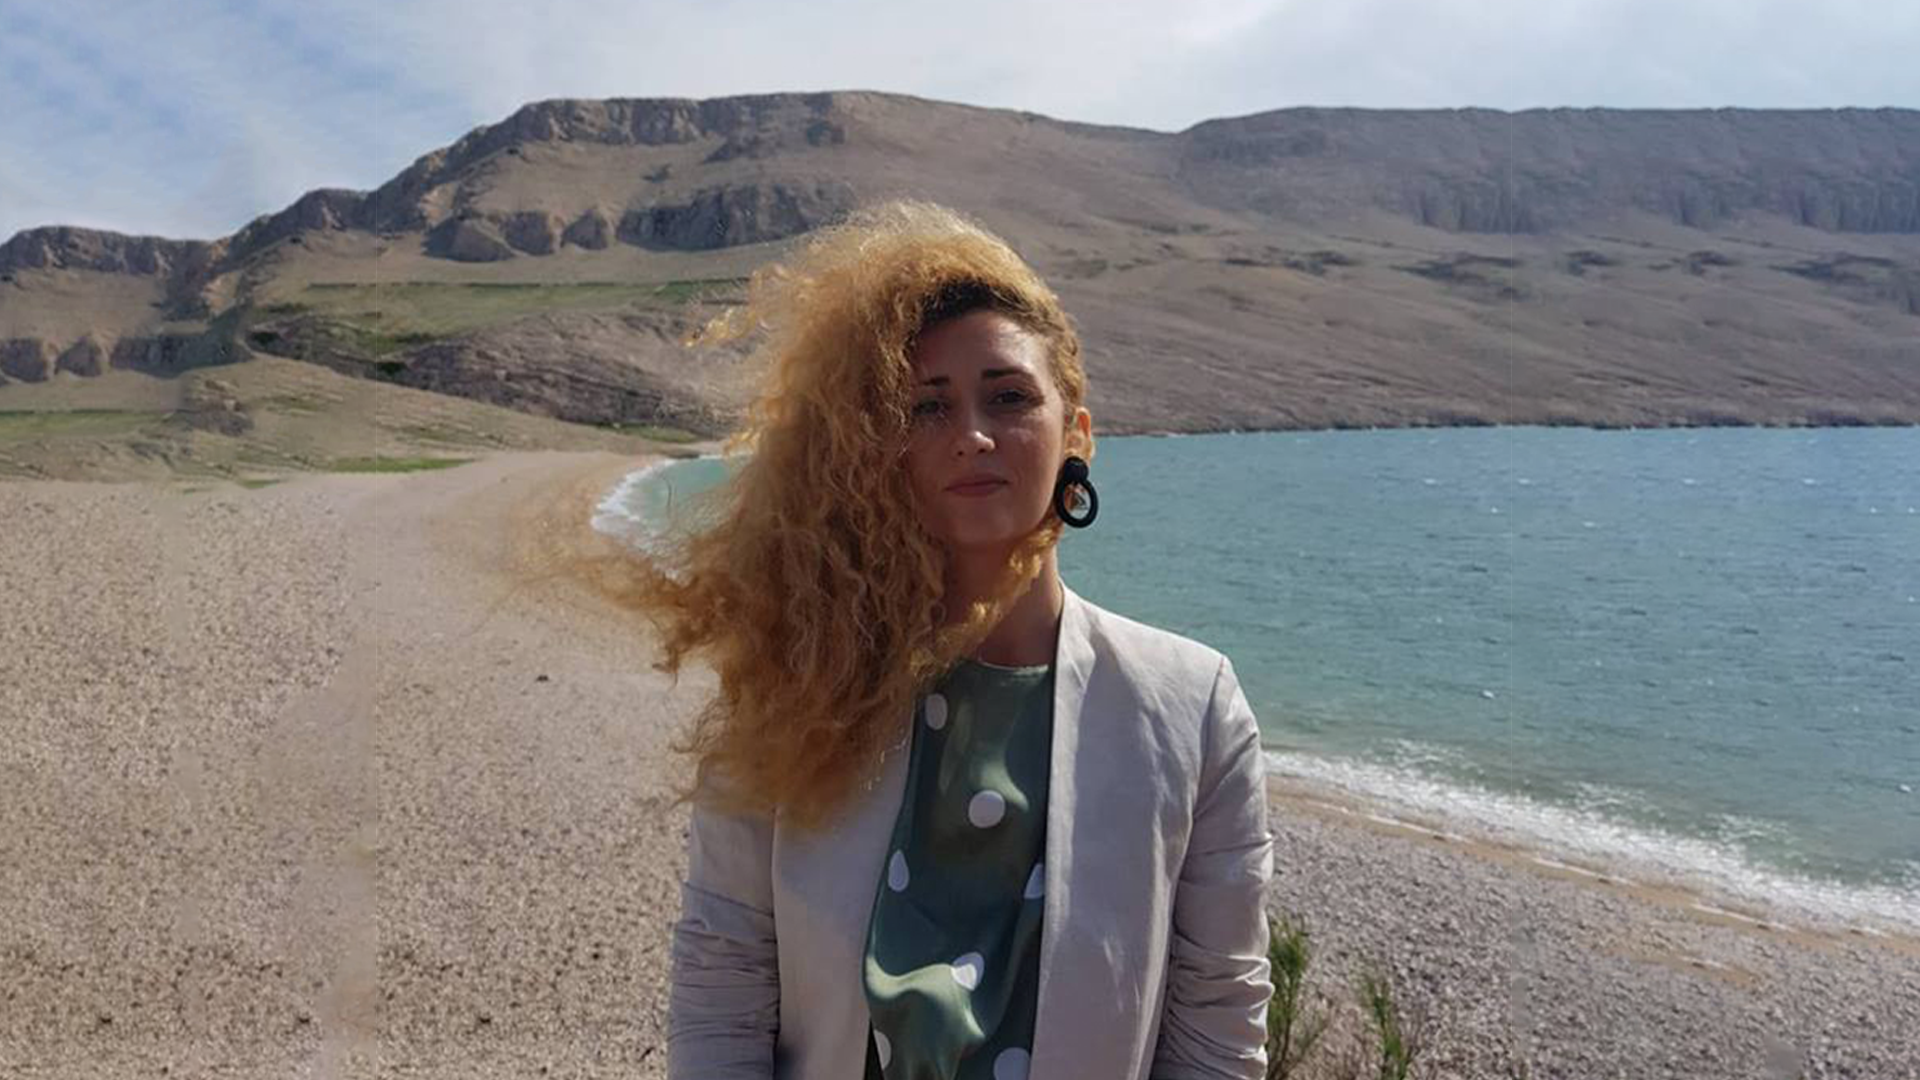 How island of Pag became heaven for outdoor activities: interview with Marina Šćiran Rizner